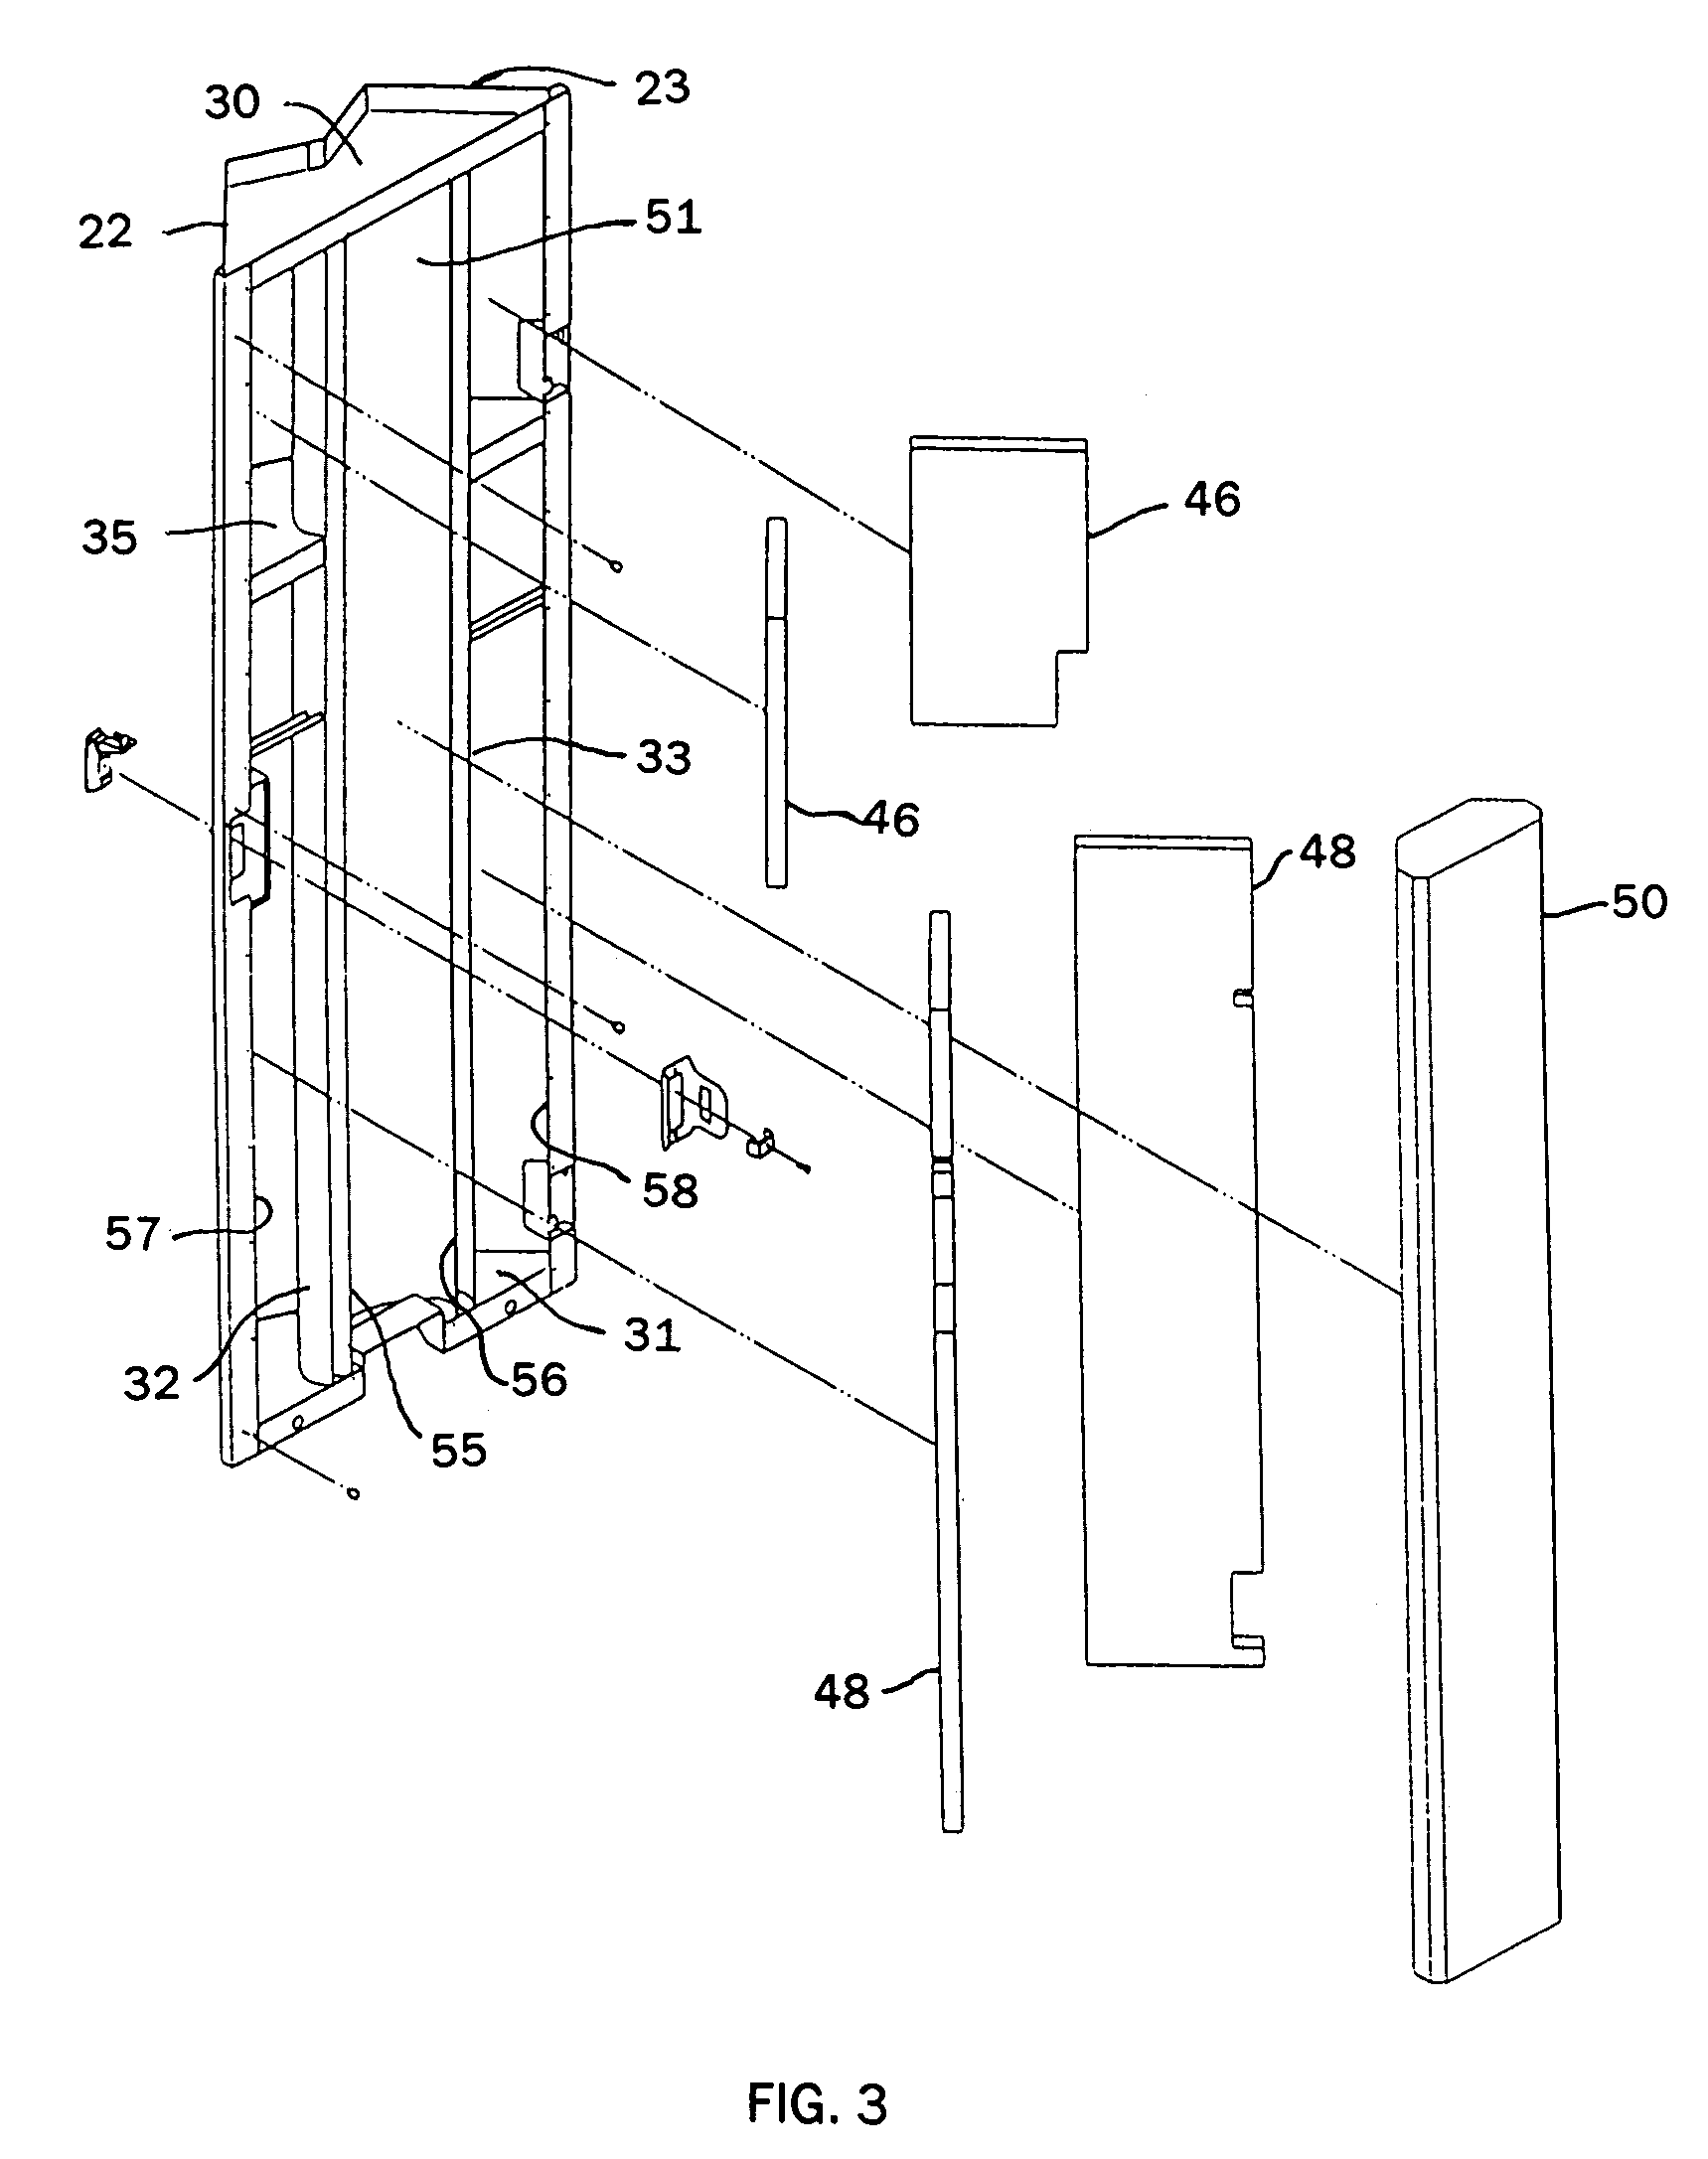 Equipment enclosure acoustical door with low impedance distributed air flow